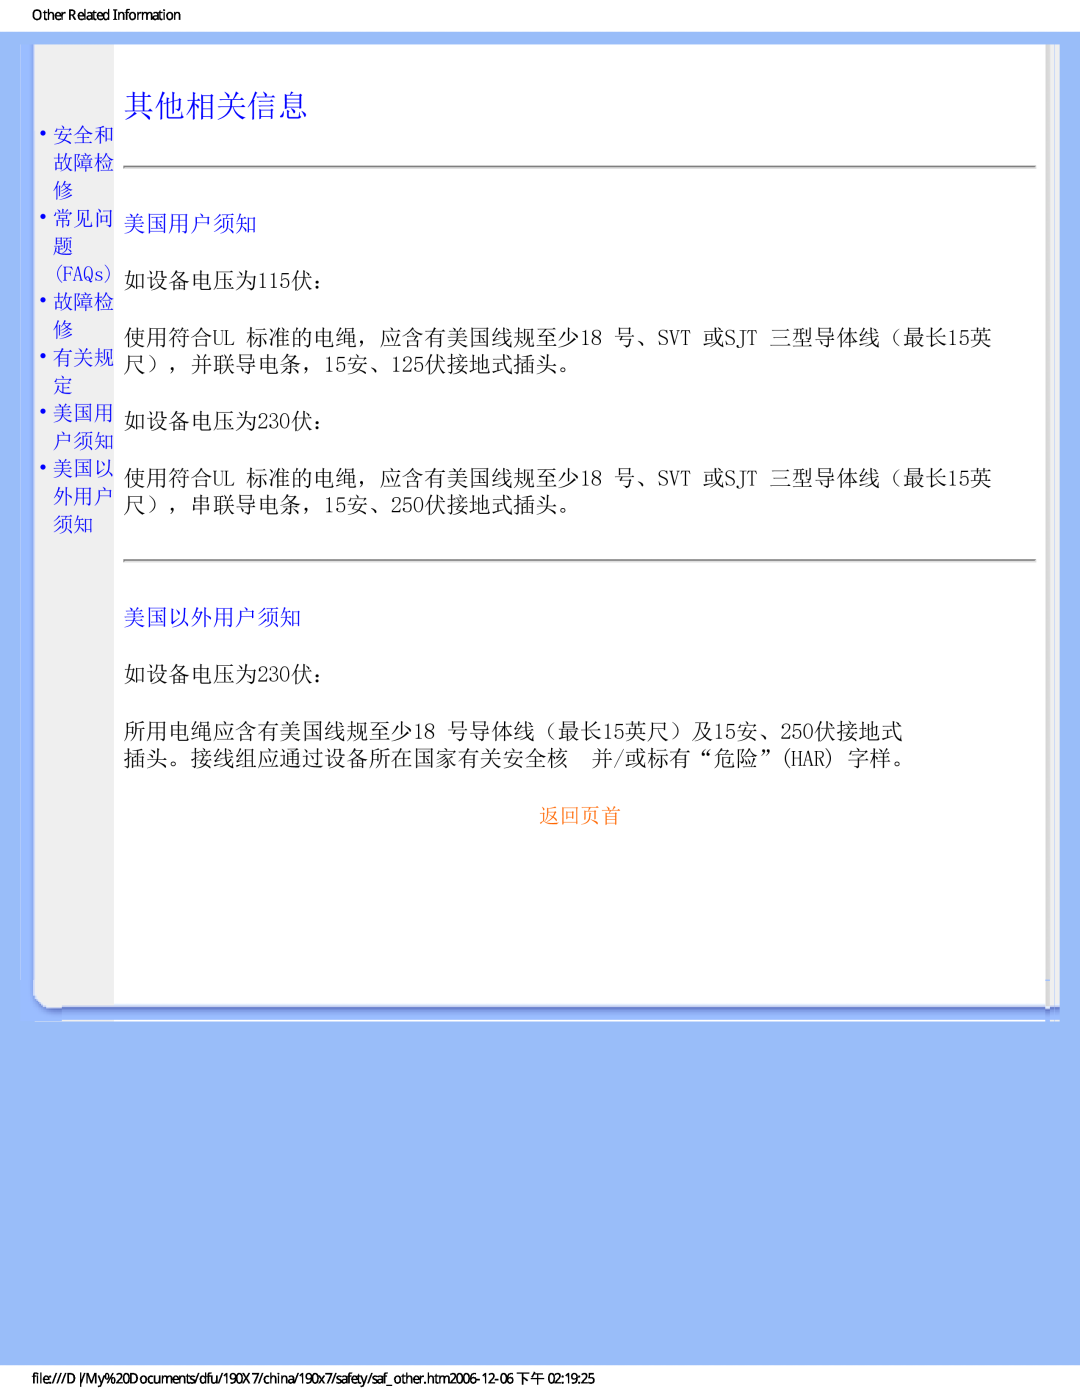 Philips 190X7 user manual 其他相关信息, 安全和 故障检 修, 返回页首, Other Related Information 